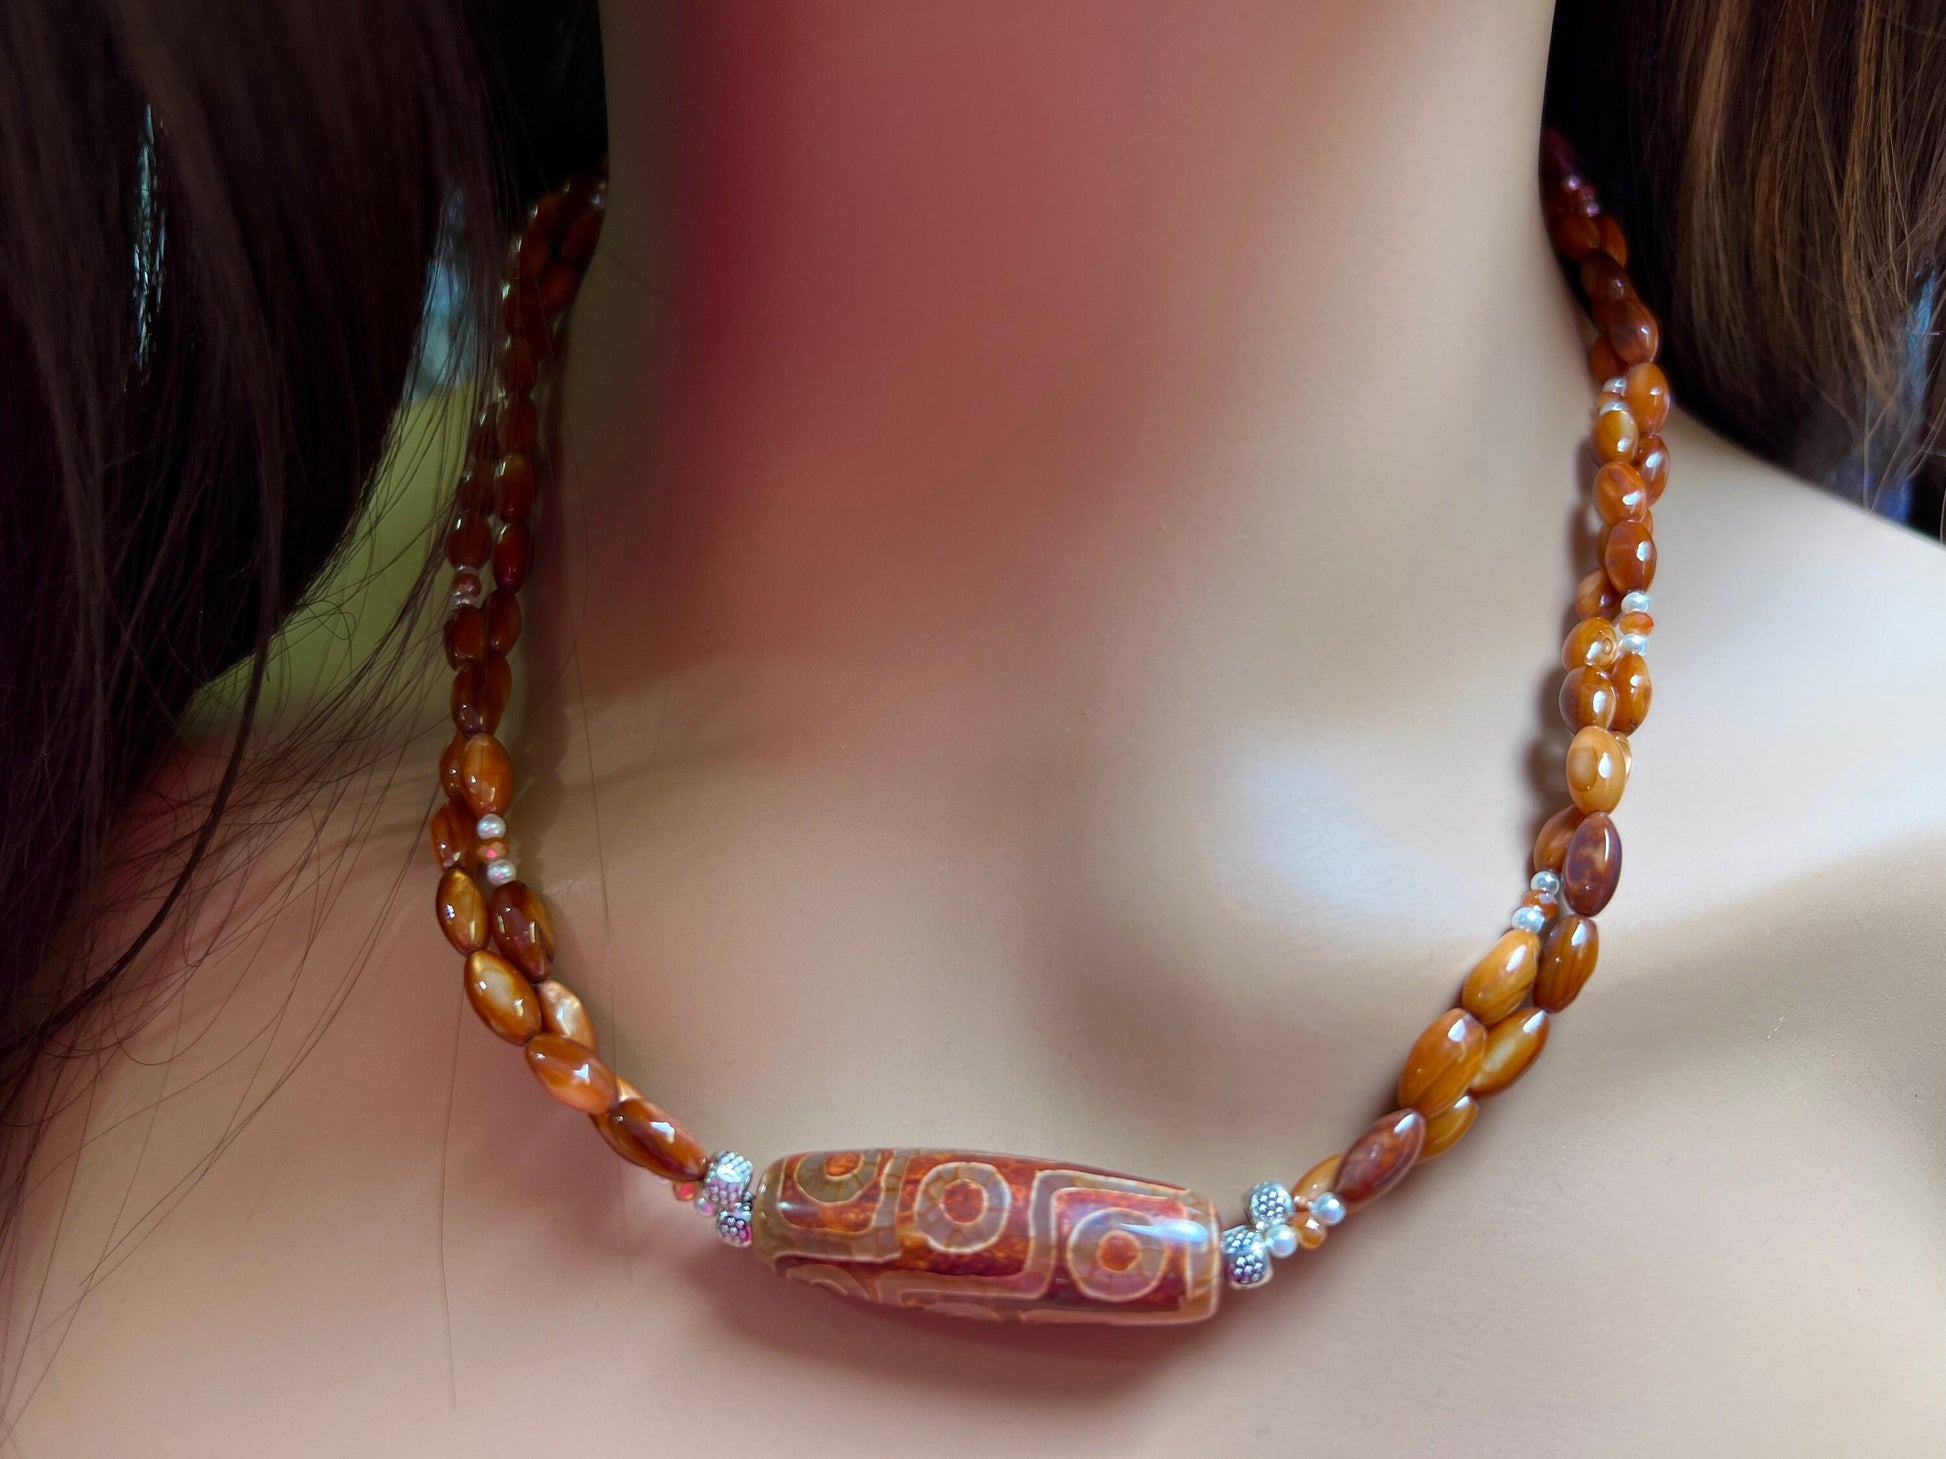 Natural Tibetan agate Evil Eye Oval drum Bead 13x40mm long 9 eye pendant with 2 line natural Mother of pearl rice oval Necklace.Vintage gift